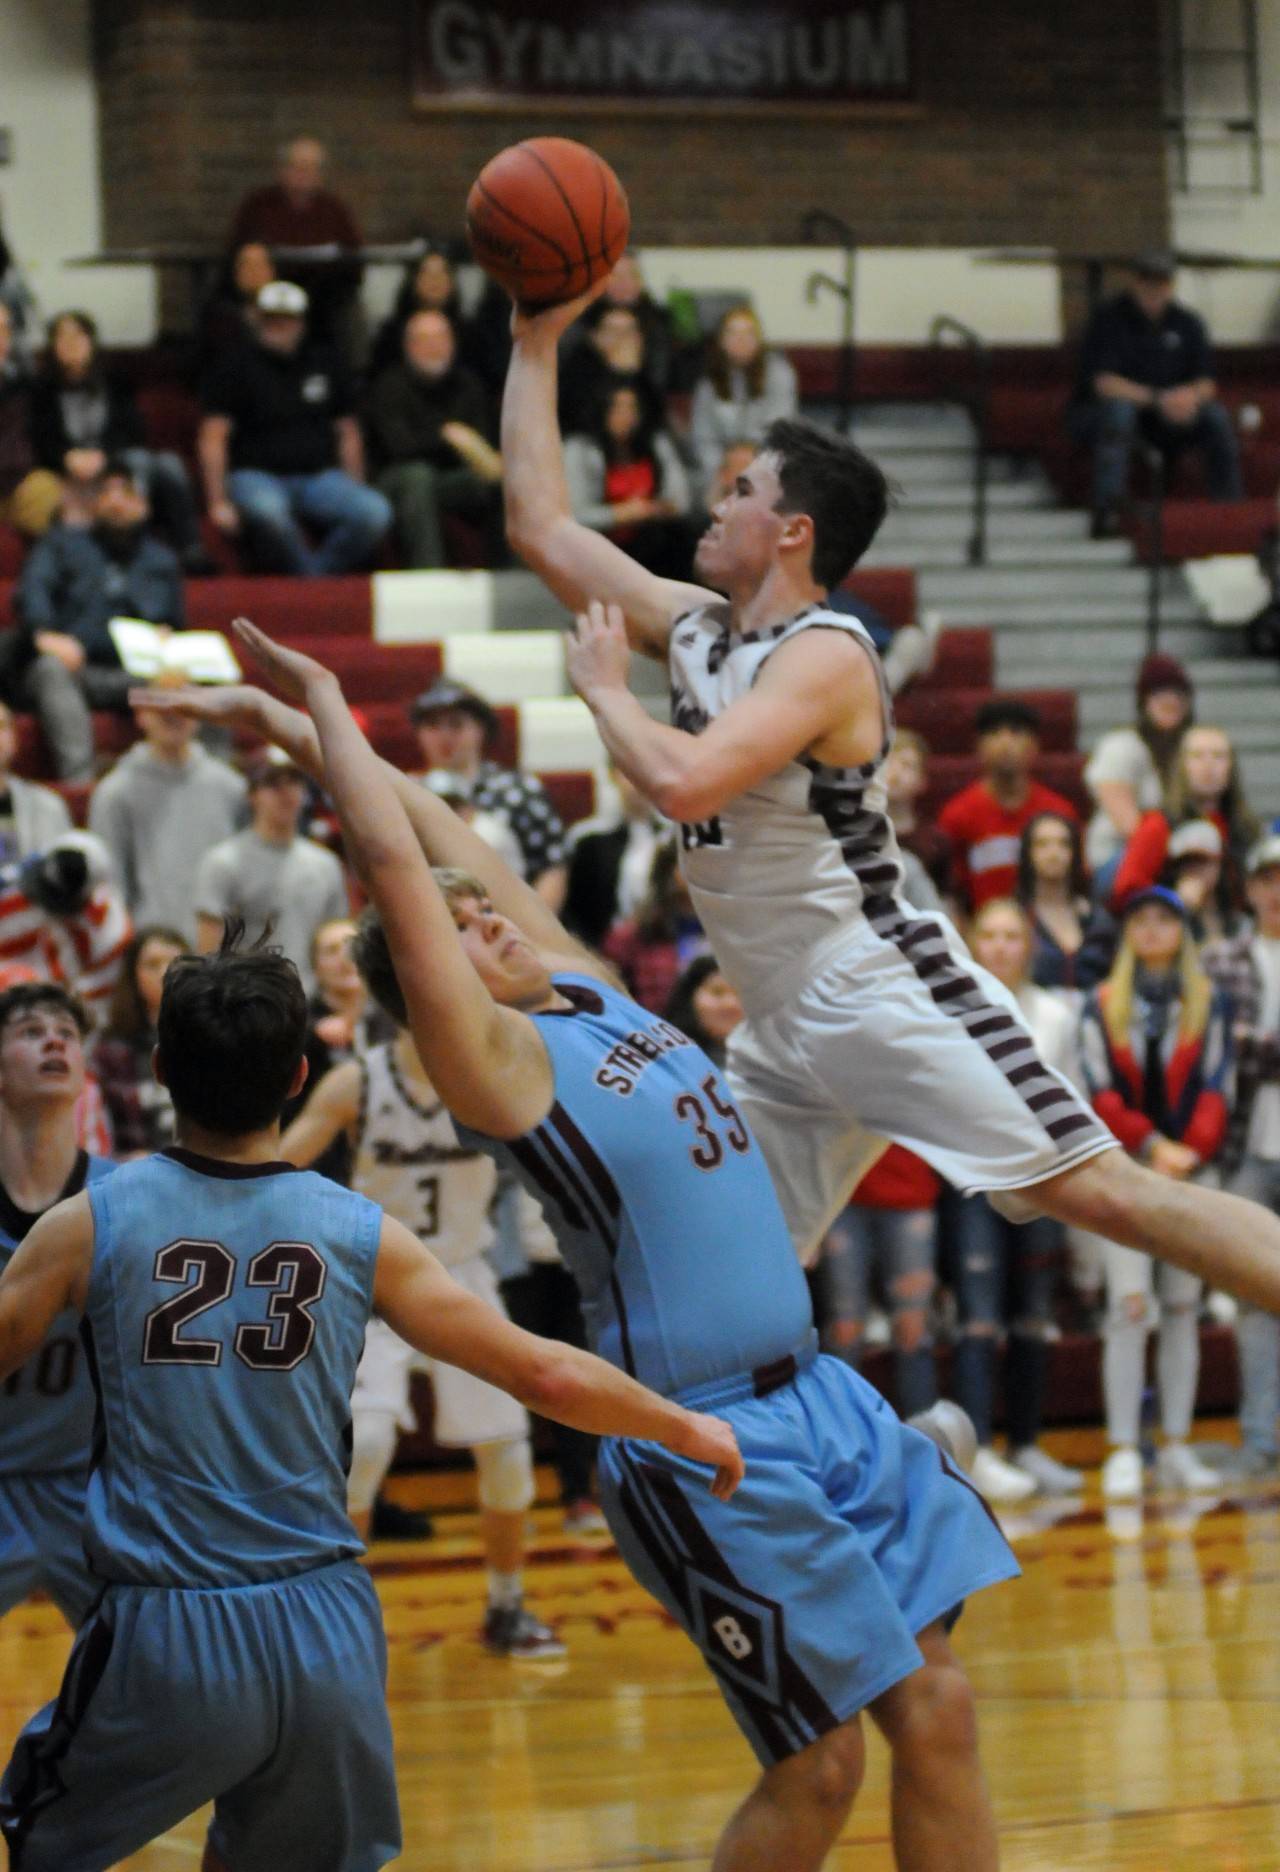 Montesano’s Trace Ridgway scores on a leaning one-handed jump shot over Stevenson’s Corrin Wahto (35) in the second half of Montesano’s 74-71 overtime loss to Stevenson in the first round of the 1A District 4 Tournament on Friday in Montesano. (Ryan Sparks | Grays Harbor News Group)